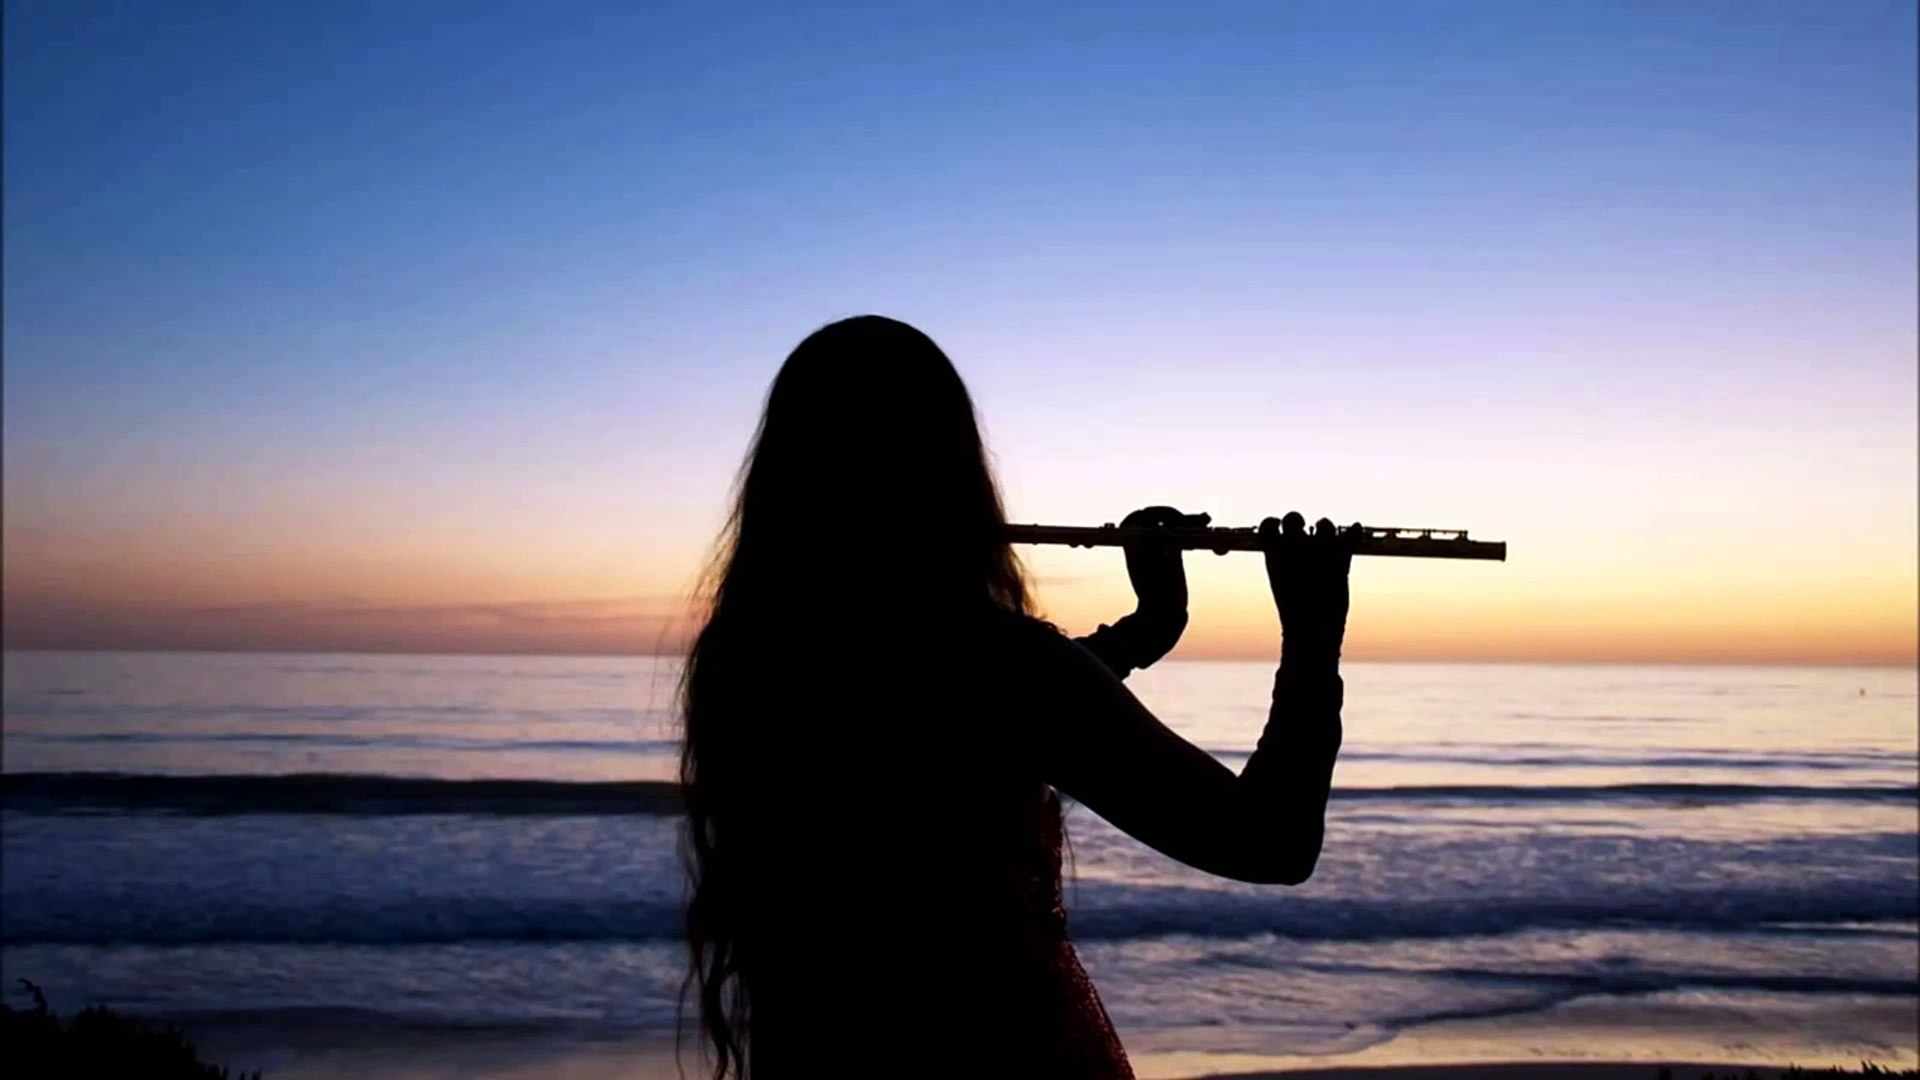 3 HOURS The Best Relaxing Piano Flute Music Ever - Dailymotion Video